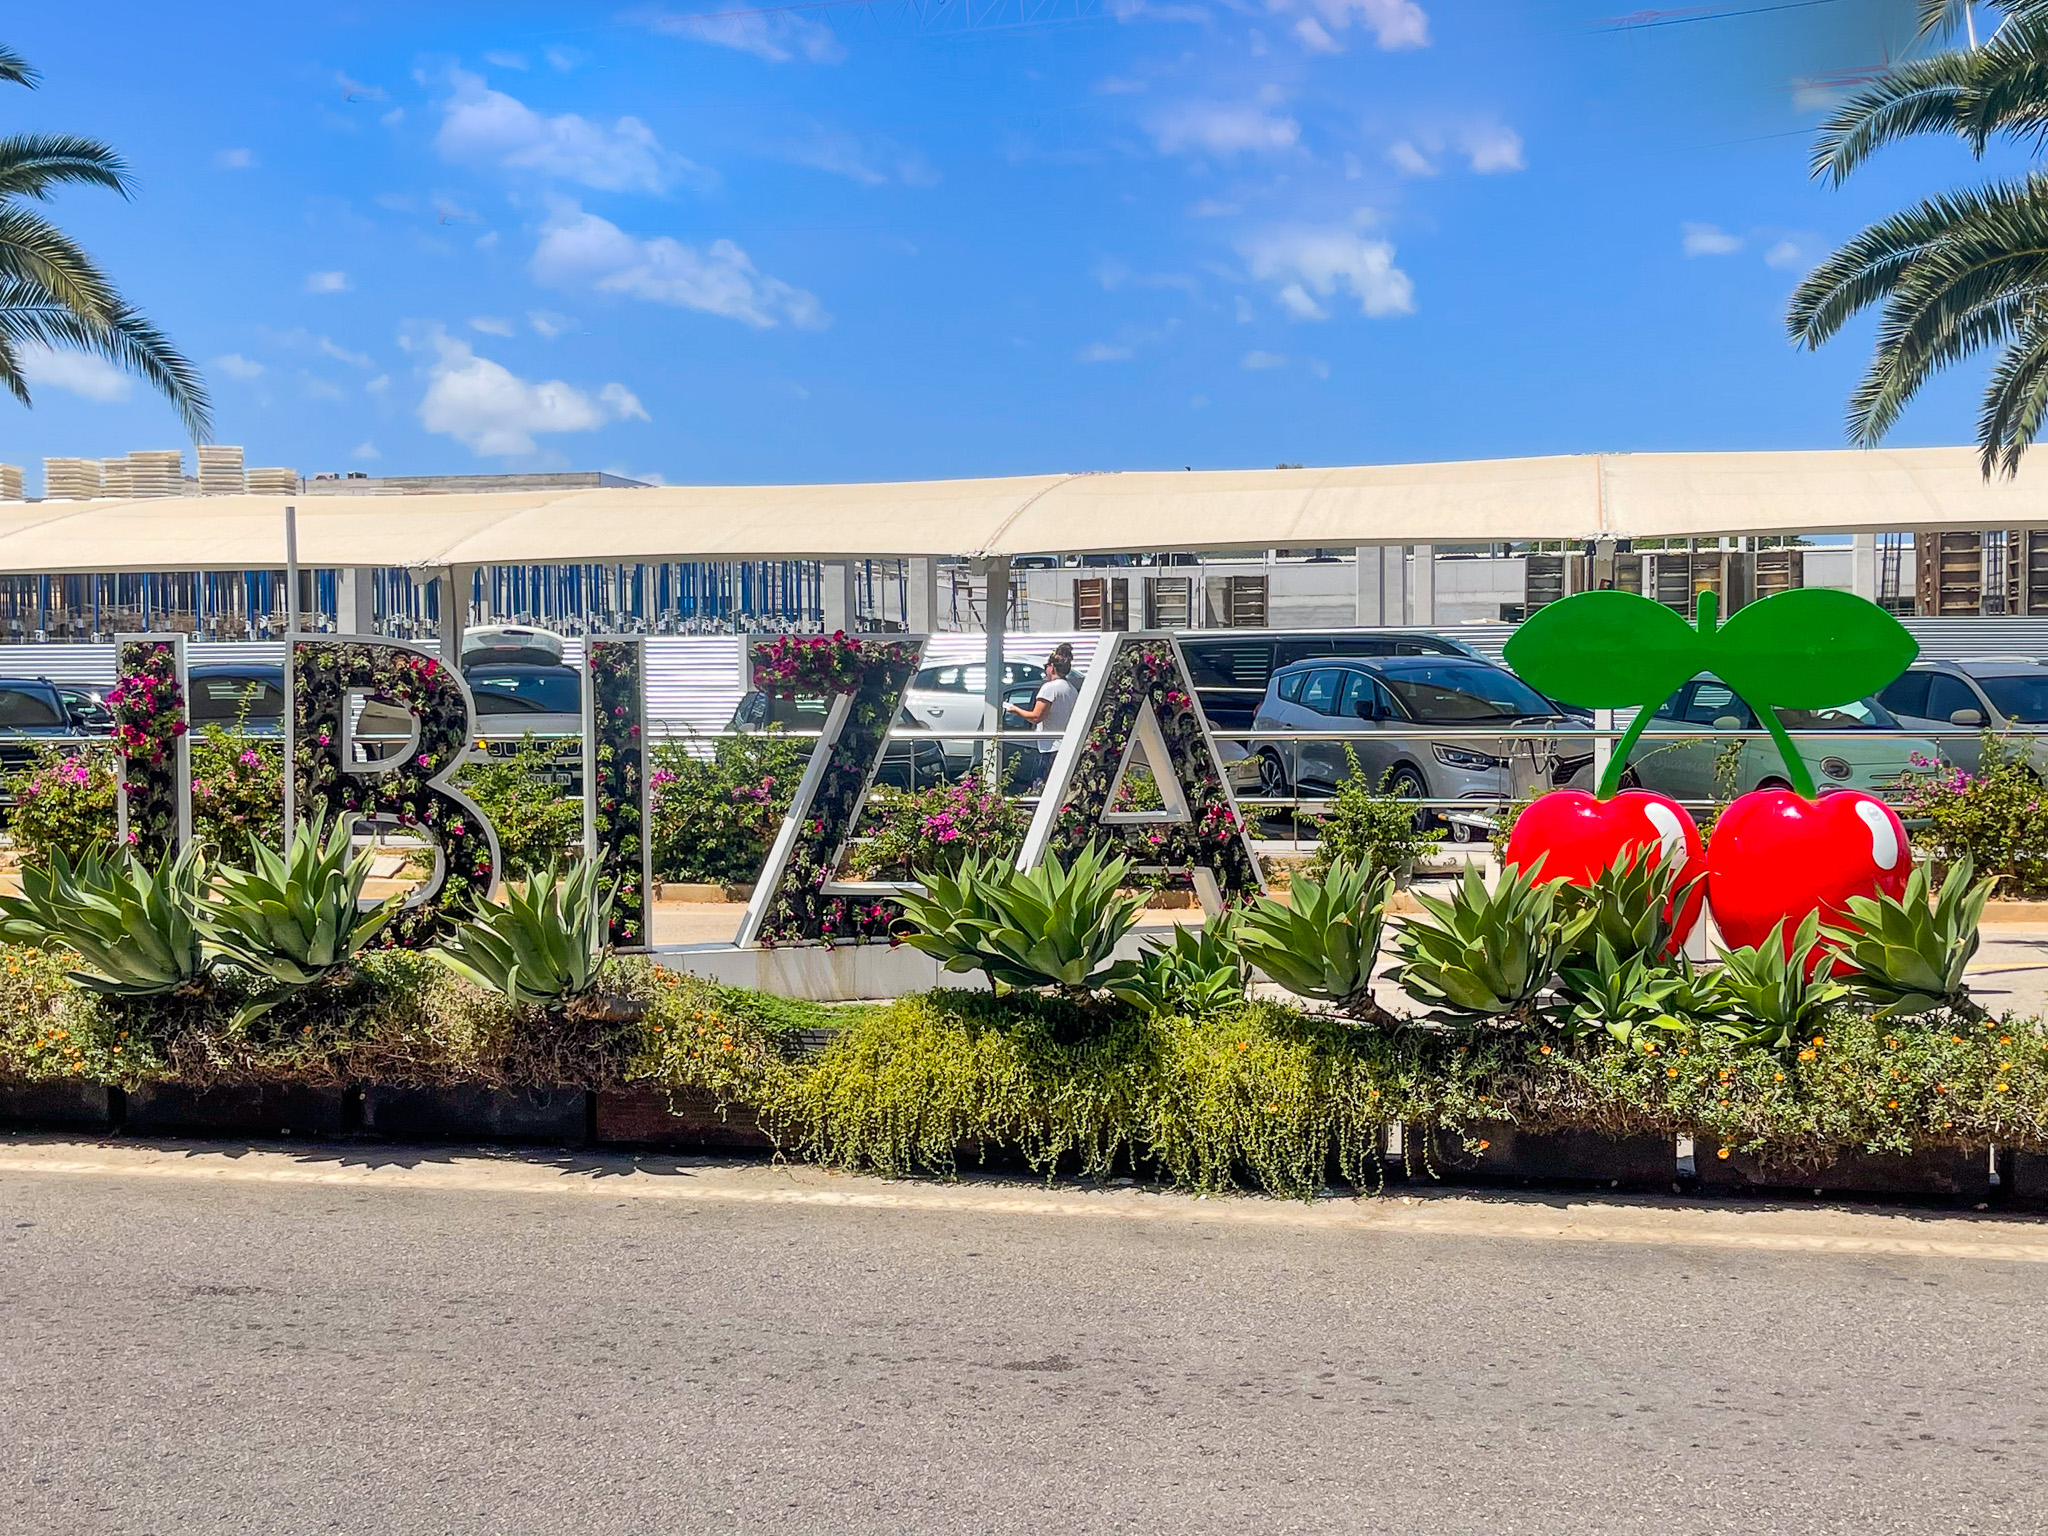 Let's plan your Ibiza Itinerary